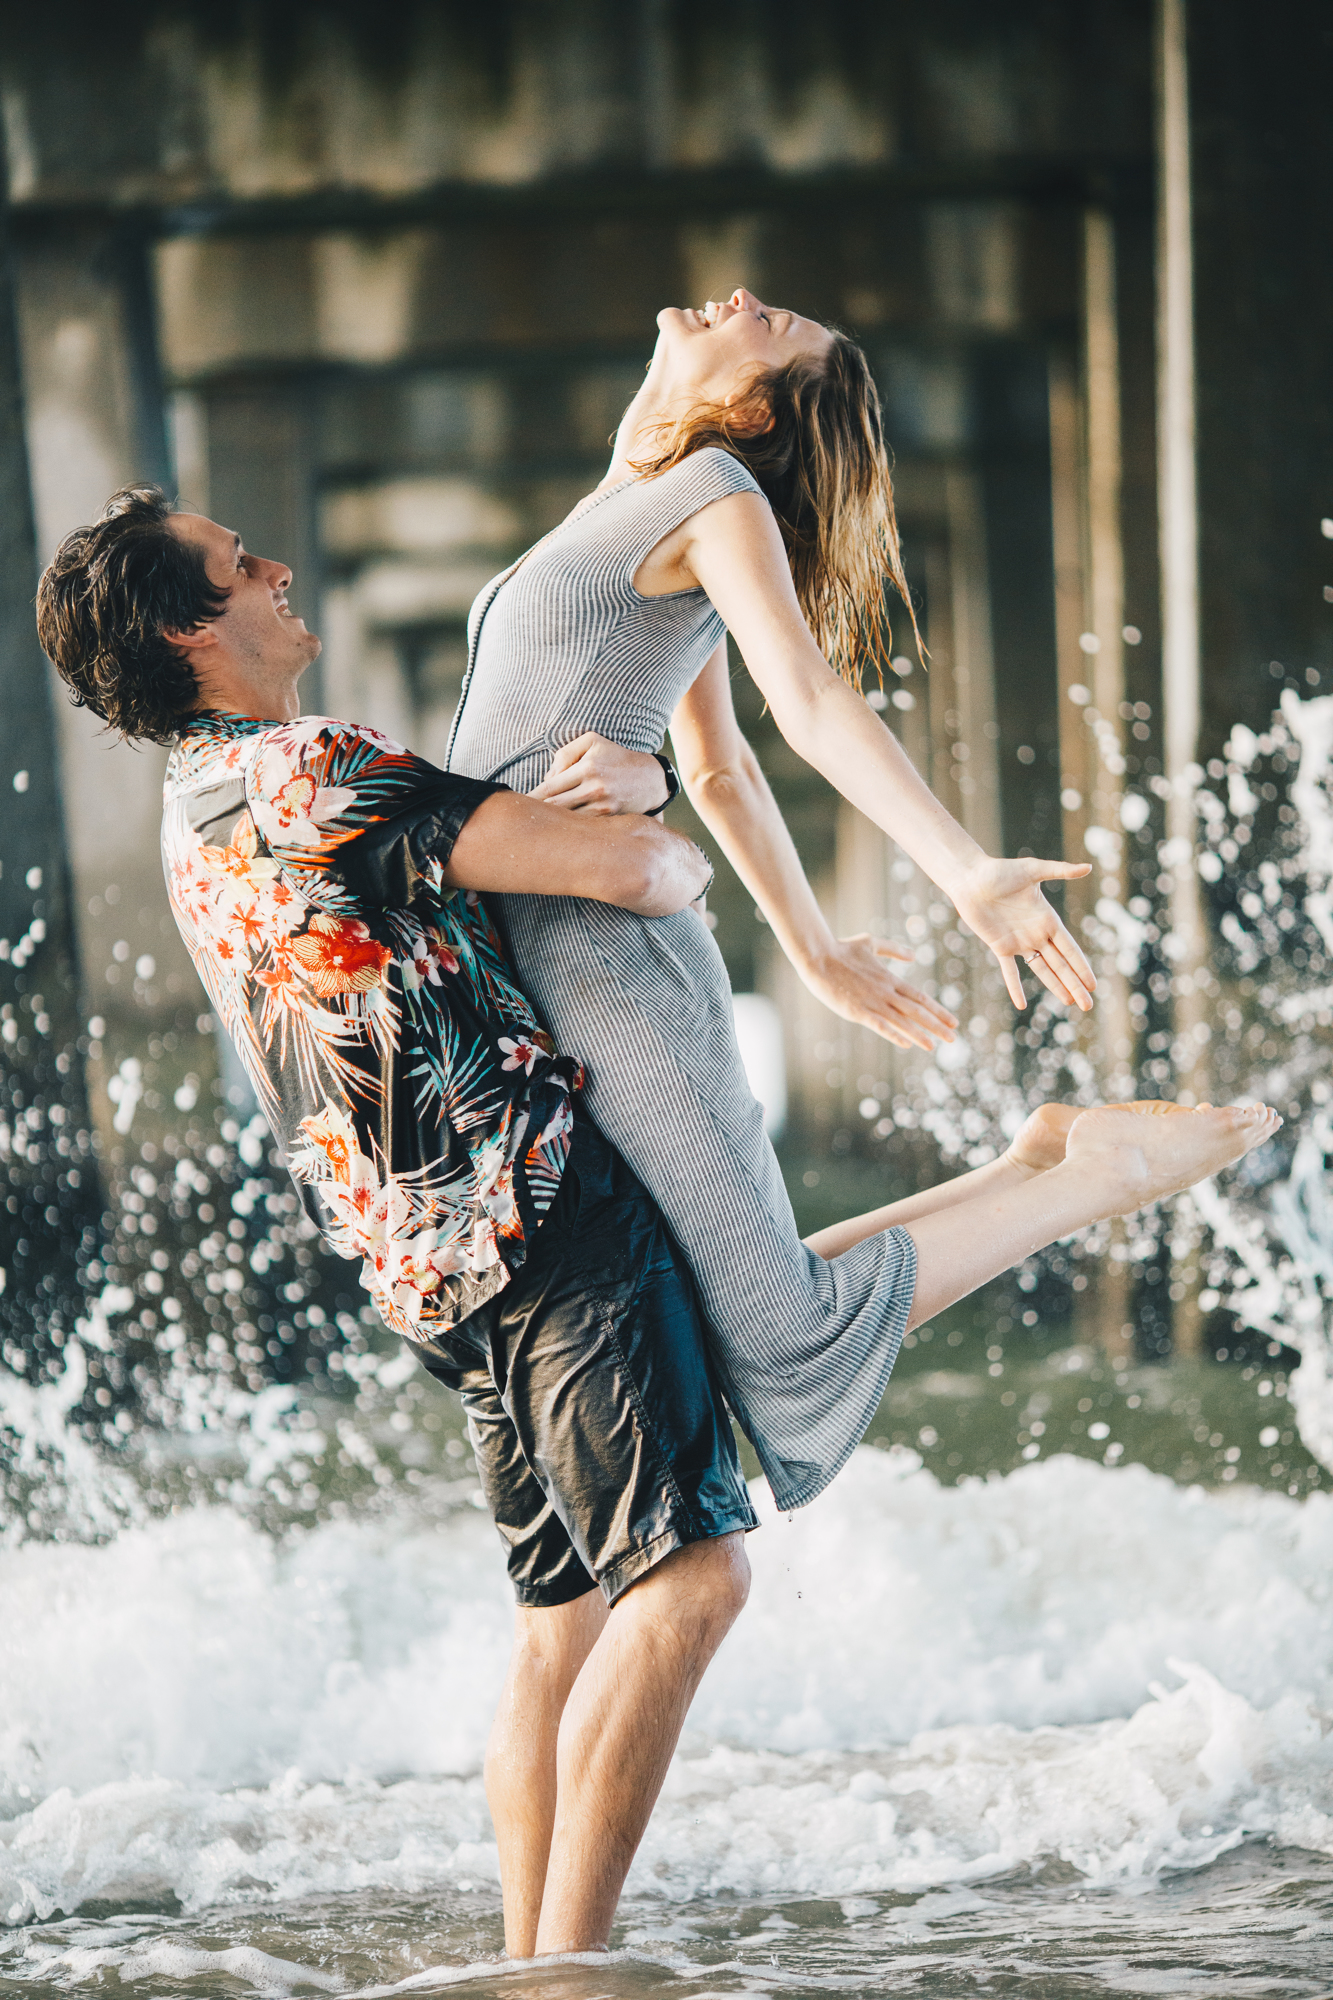 Lively Sunrise Engagement Photos on the Beach at Coney Island